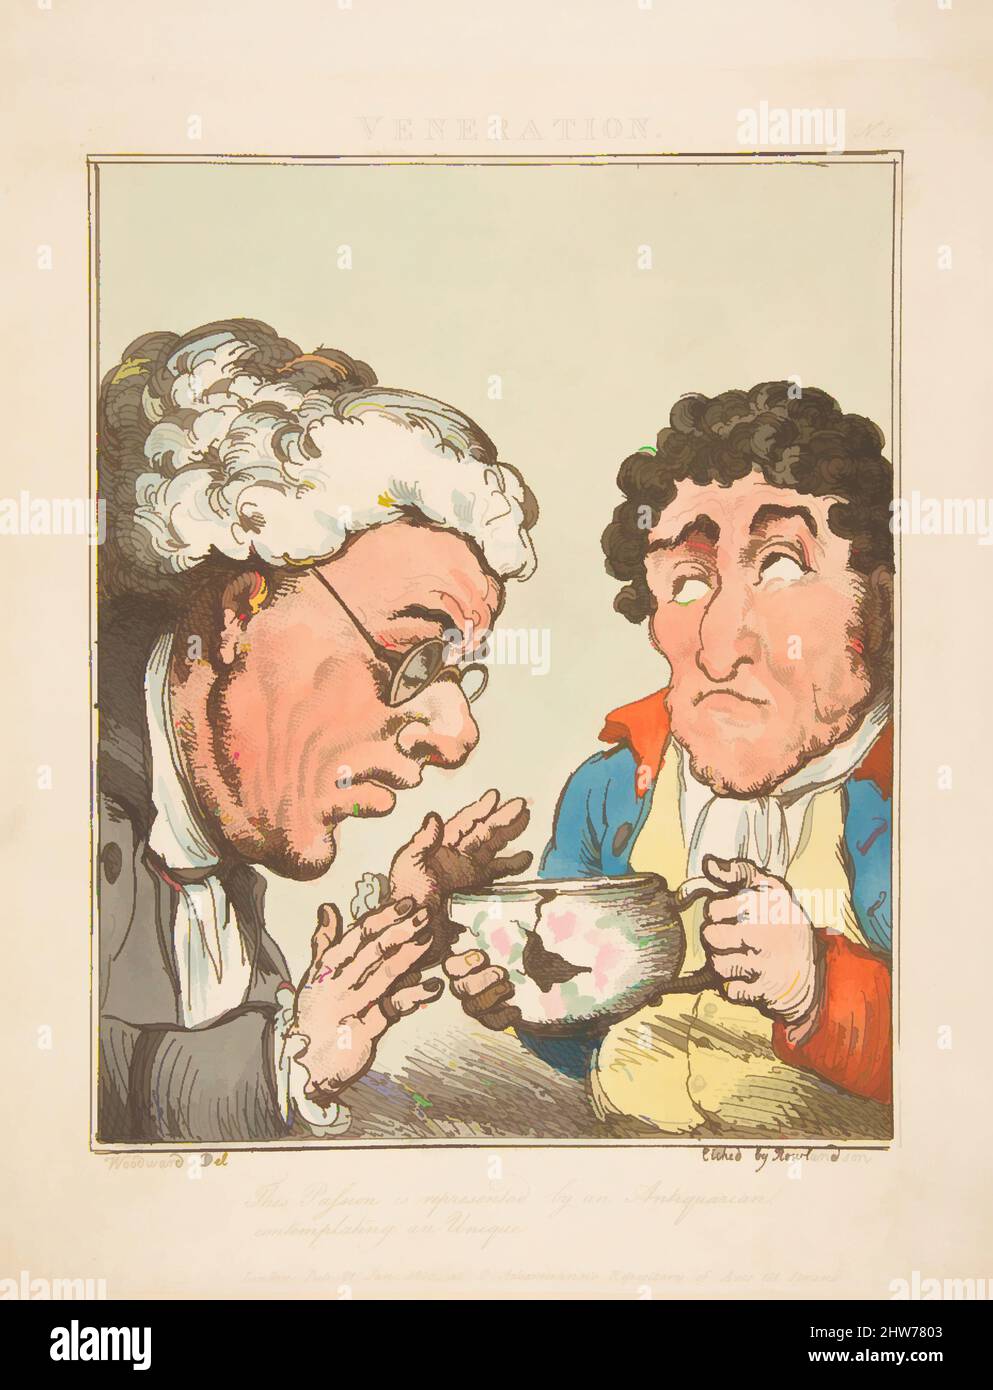 Art inspired by Veneration (Le Brun Travested, or Caricatures of the Passions), January 21, 1800, Hand-colored etching, printed in brown ink, sheet: 11 1/2 x 8 7/8 in. (29.2 x 22.6 cm), Prints, After George Moutard Woodward (British, ca. 1760–1809 London, Classic works modernized by Artotop with a splash of modernity. Shapes, color and value, eye-catching visual impact on art. Emotions through freedom of artworks in a contemporary way. A timeless message pursuing a wildly creative new direction. Artists turning to the digital medium and creating the Artotop NFT Stock Photo